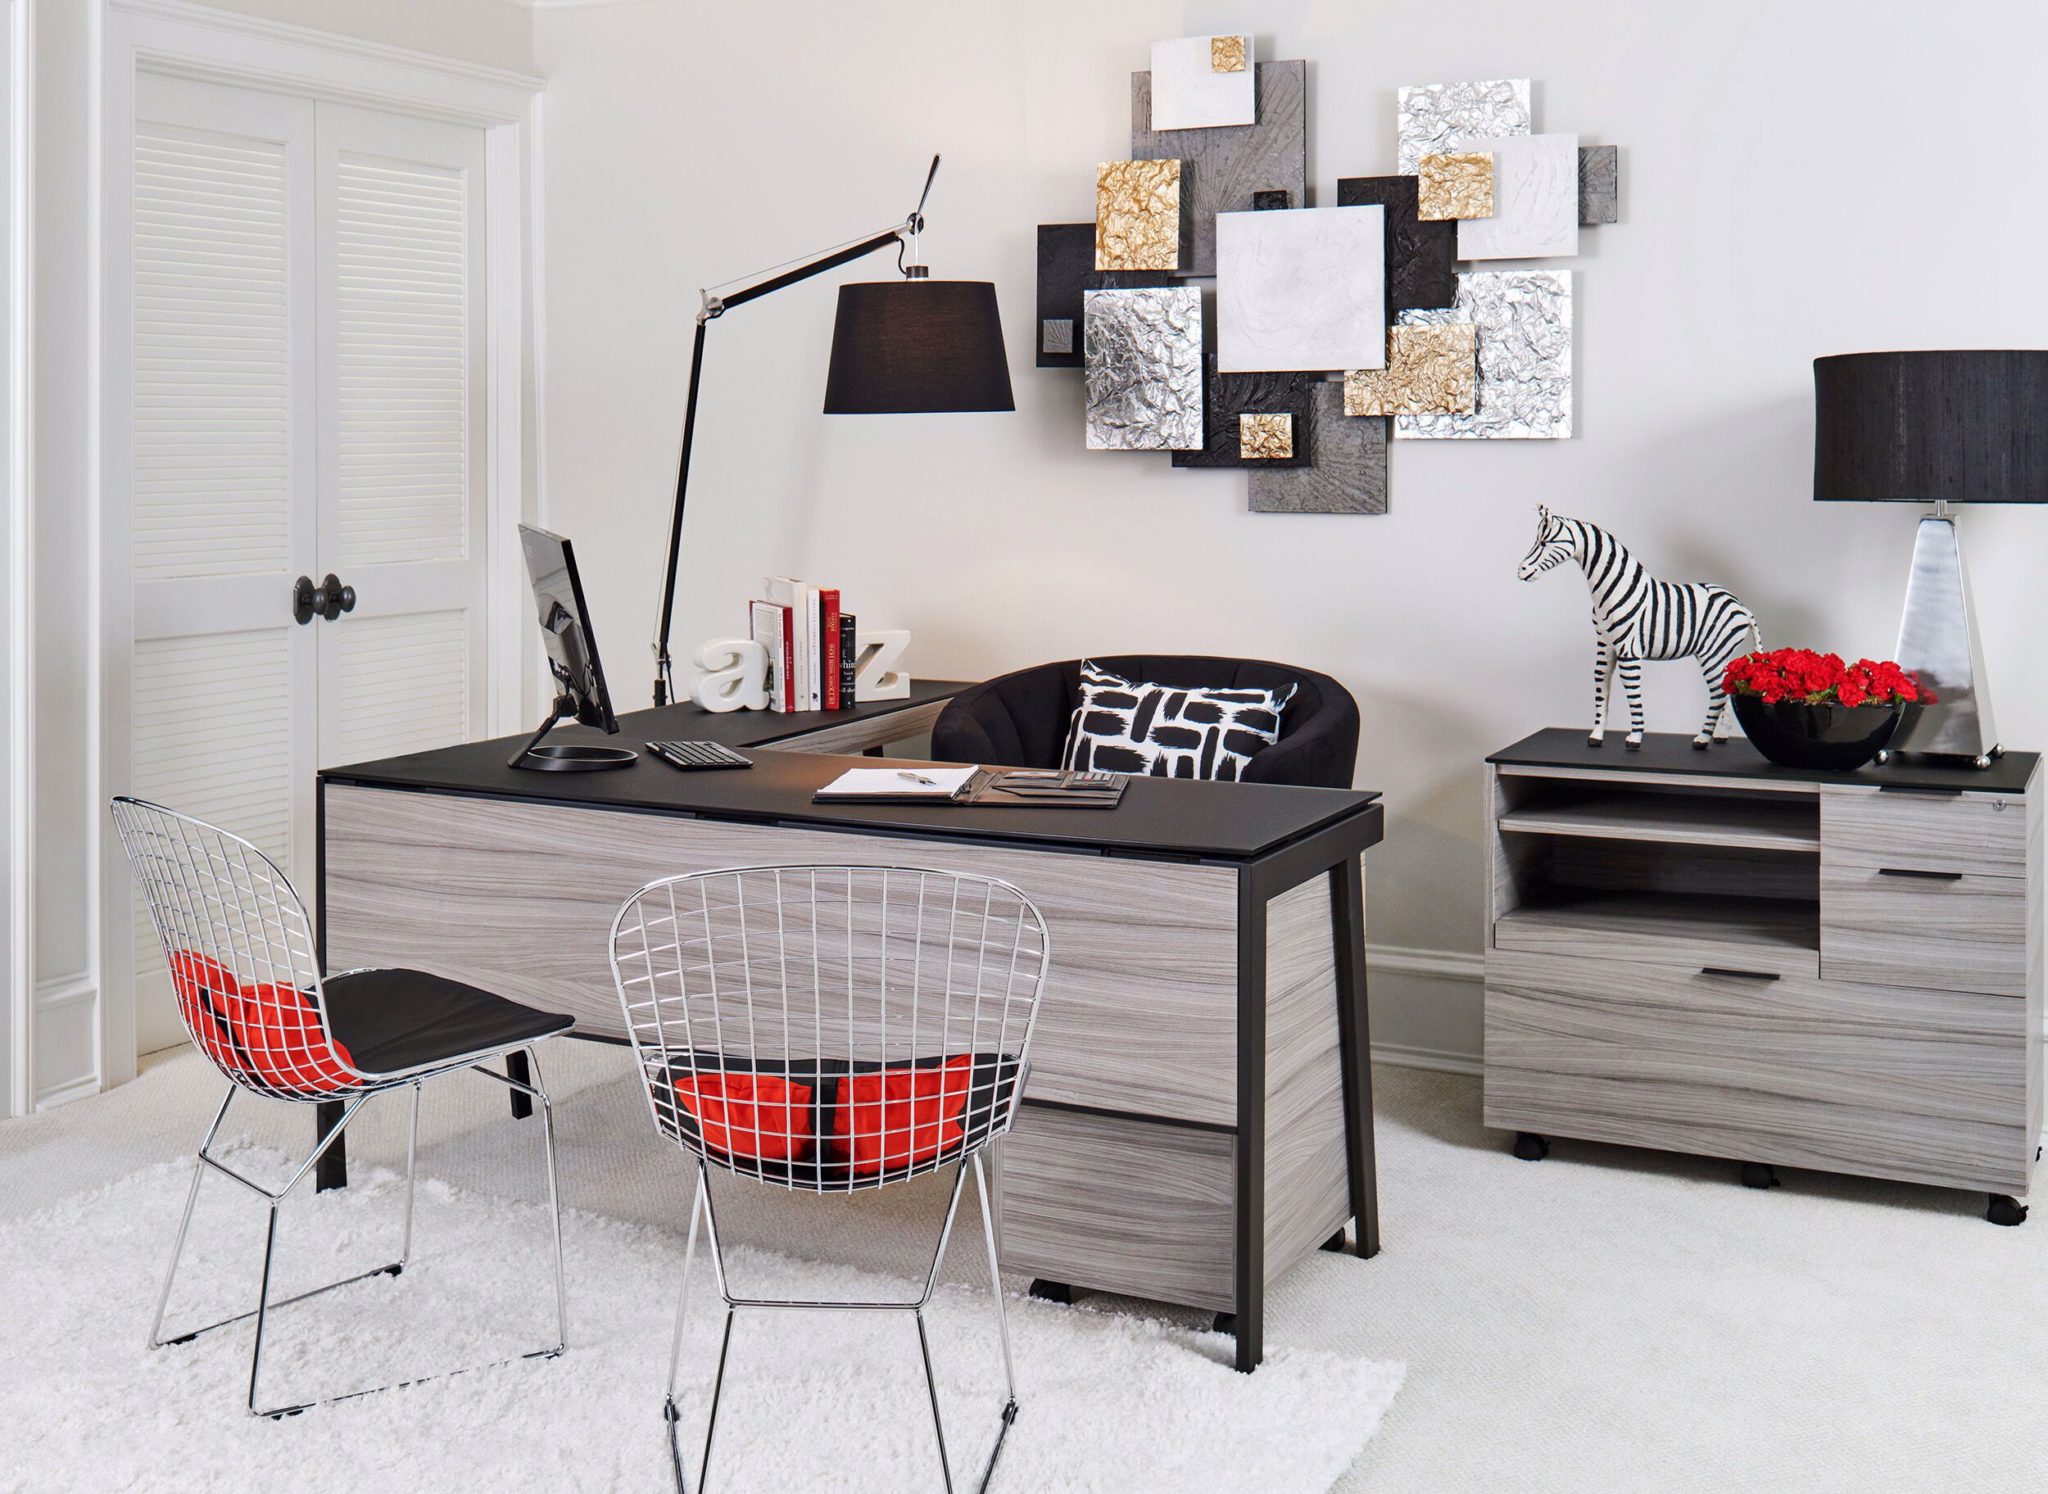 Creating a study space for your teen